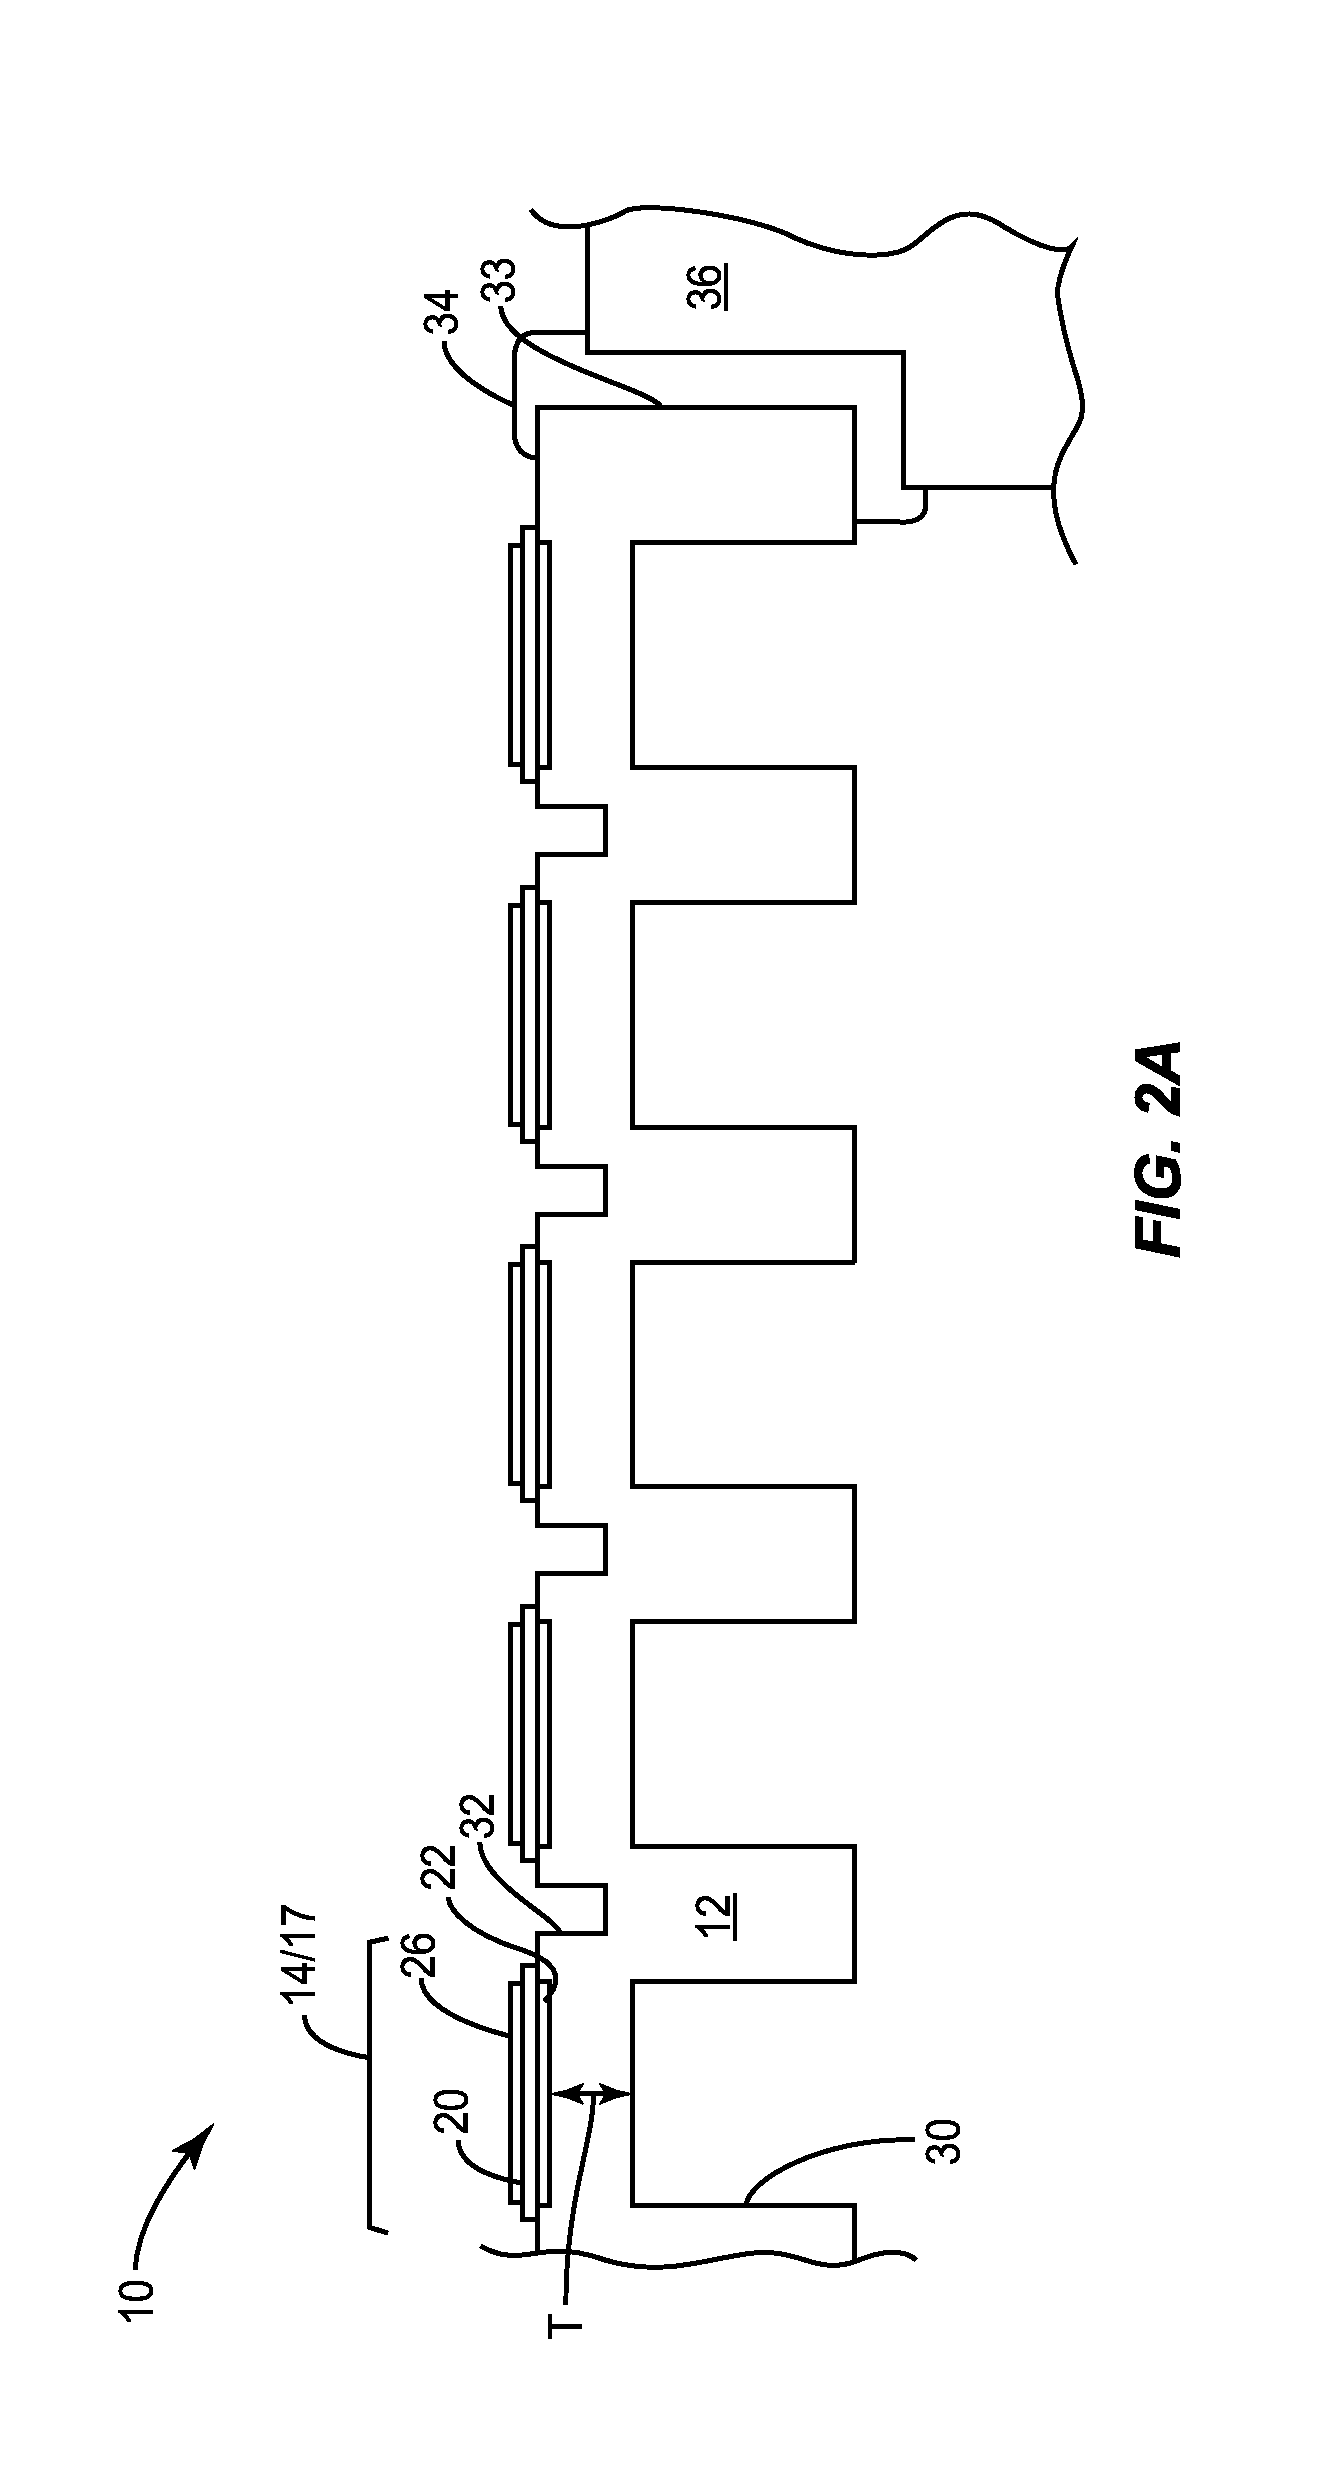 pMUT ARRAY FOR ULTRASONIC IMAGING, AND RELATED APPARATUSES, SYSTEMS, AND METHODS